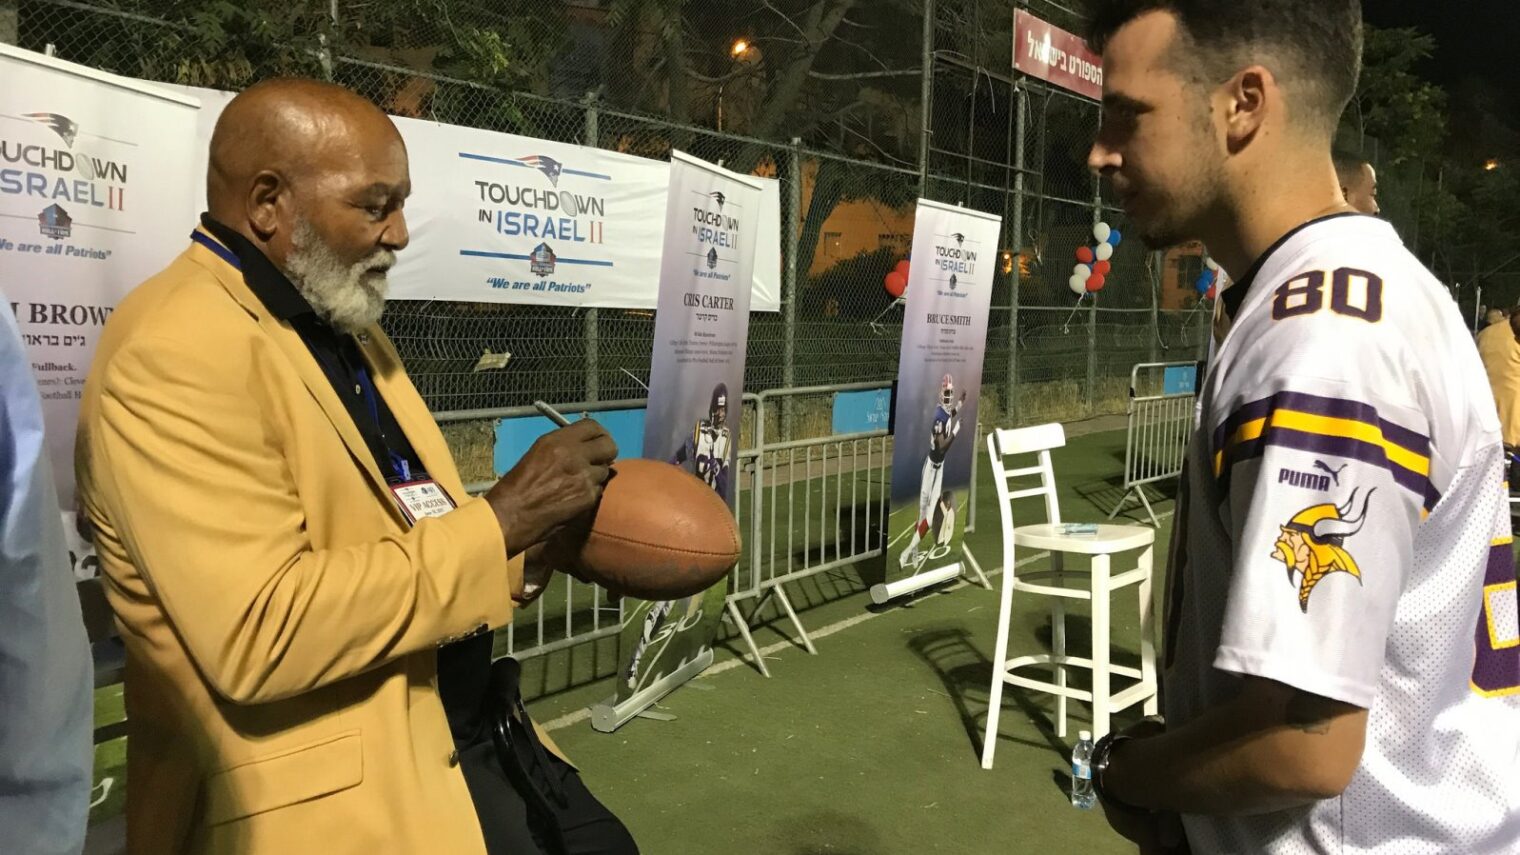 Former Cleveland Browns great Jim Brown signing a football for a fan at Kraft Family Stadium, Jerusalem, June 18, 2017. Photo by Abigail K. Leichman